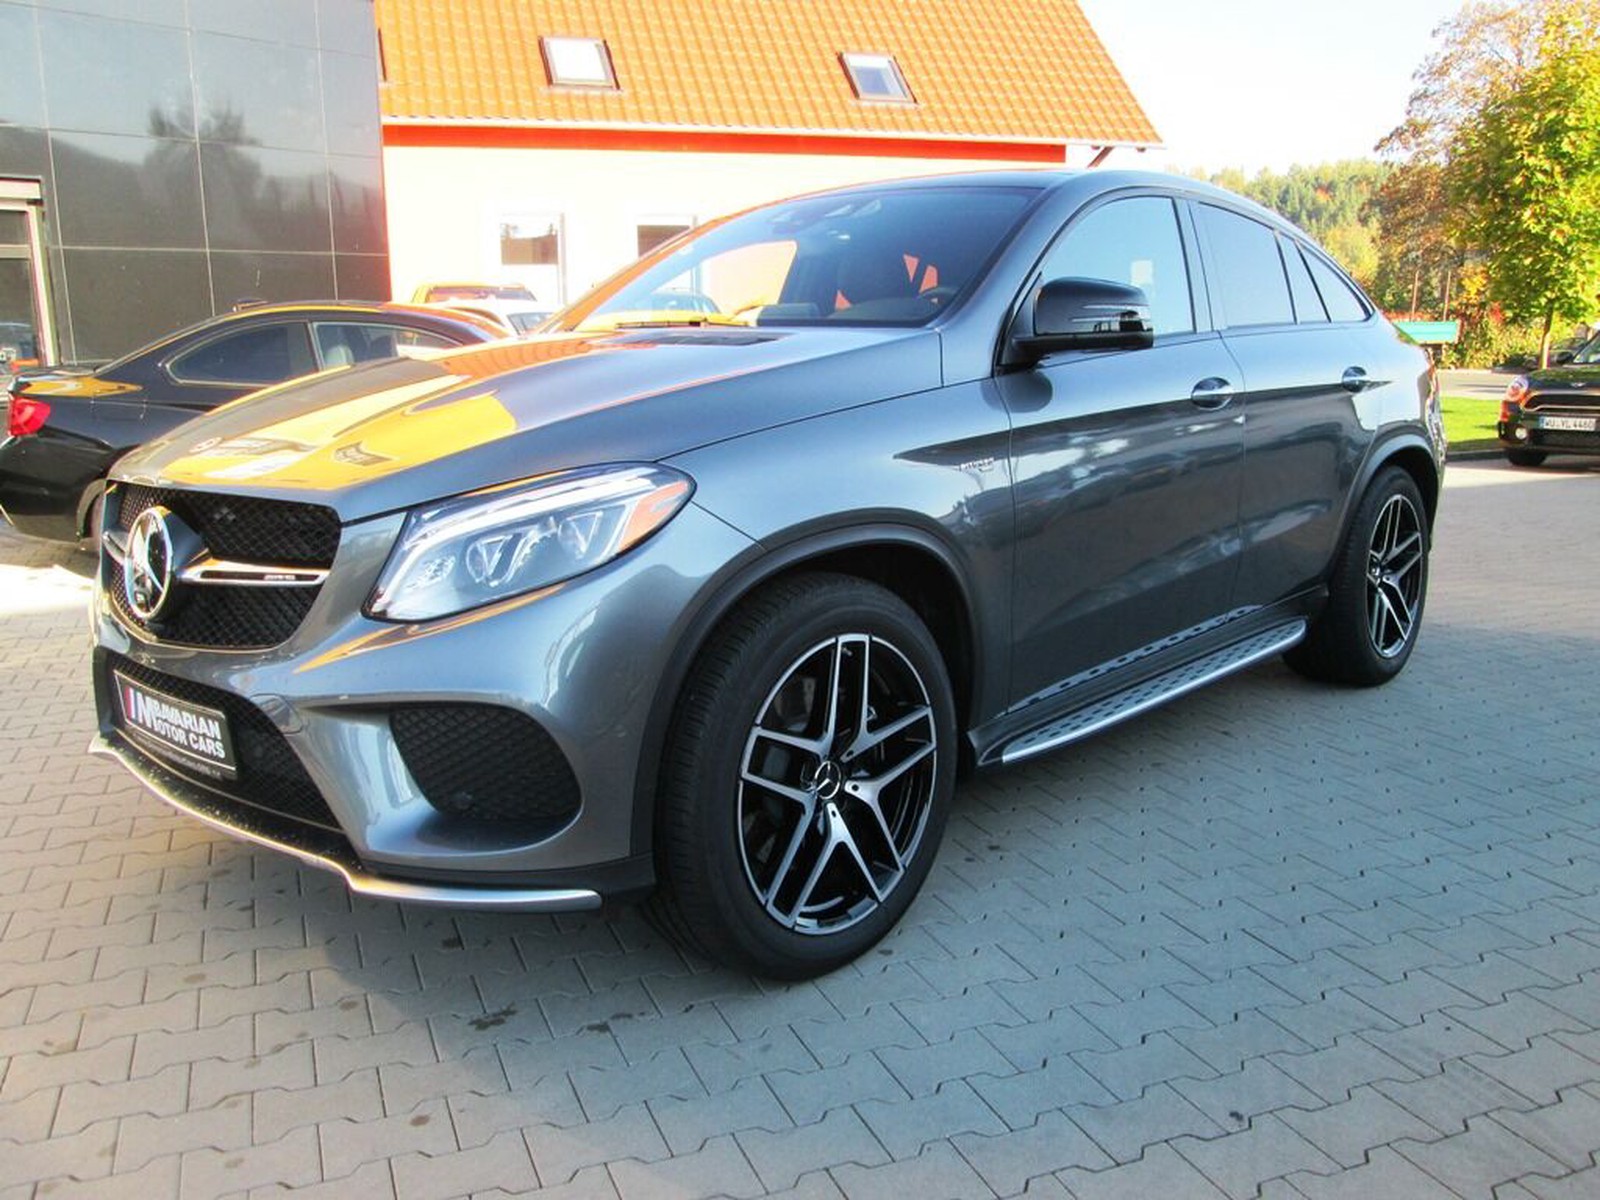 Mercedes Benz Gle 43 Amg Gle43 Amg Coupe Suv Tax Free Military Sales In Peachtree Corners Ga Price Usd Int Nr U Sold